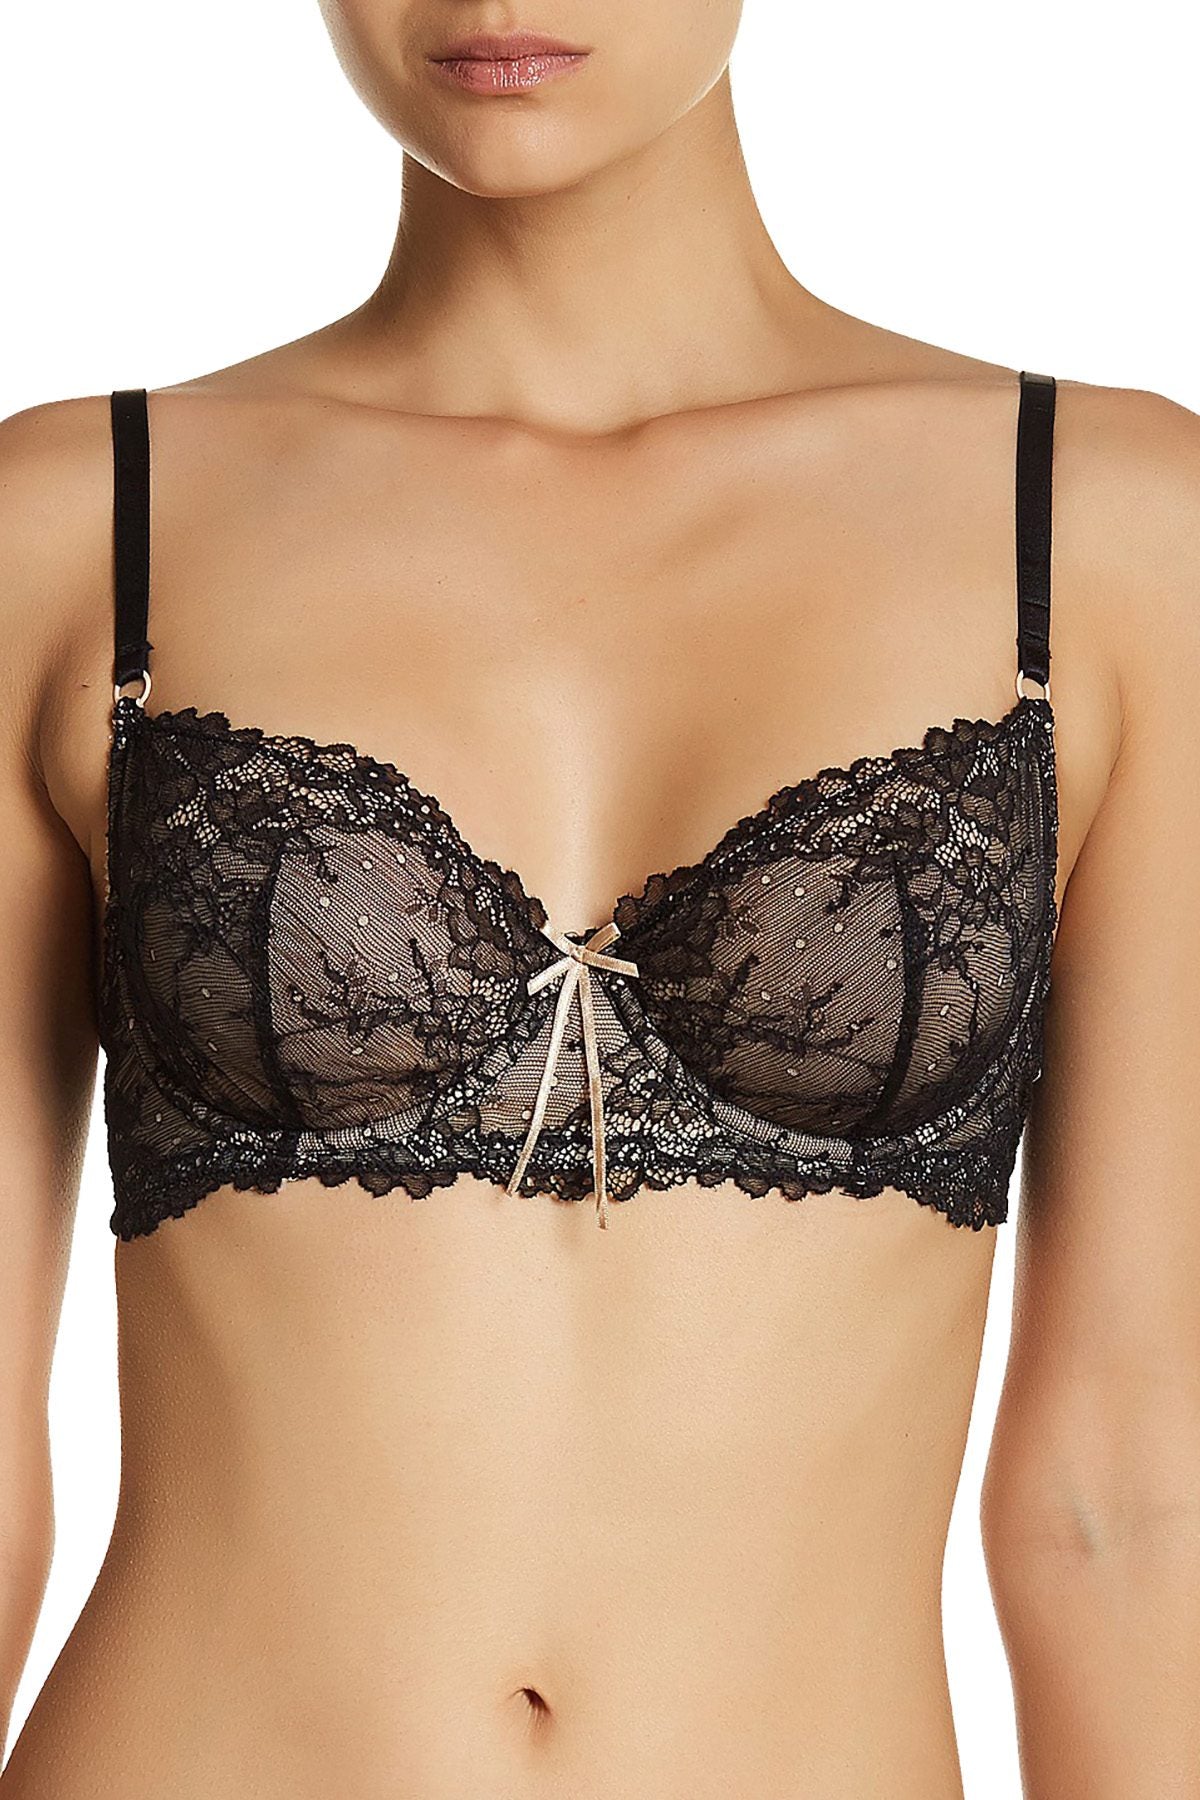 HEIDI by Heidi Klum Black & Toasted Almond Natural French Lace Underwire Bra